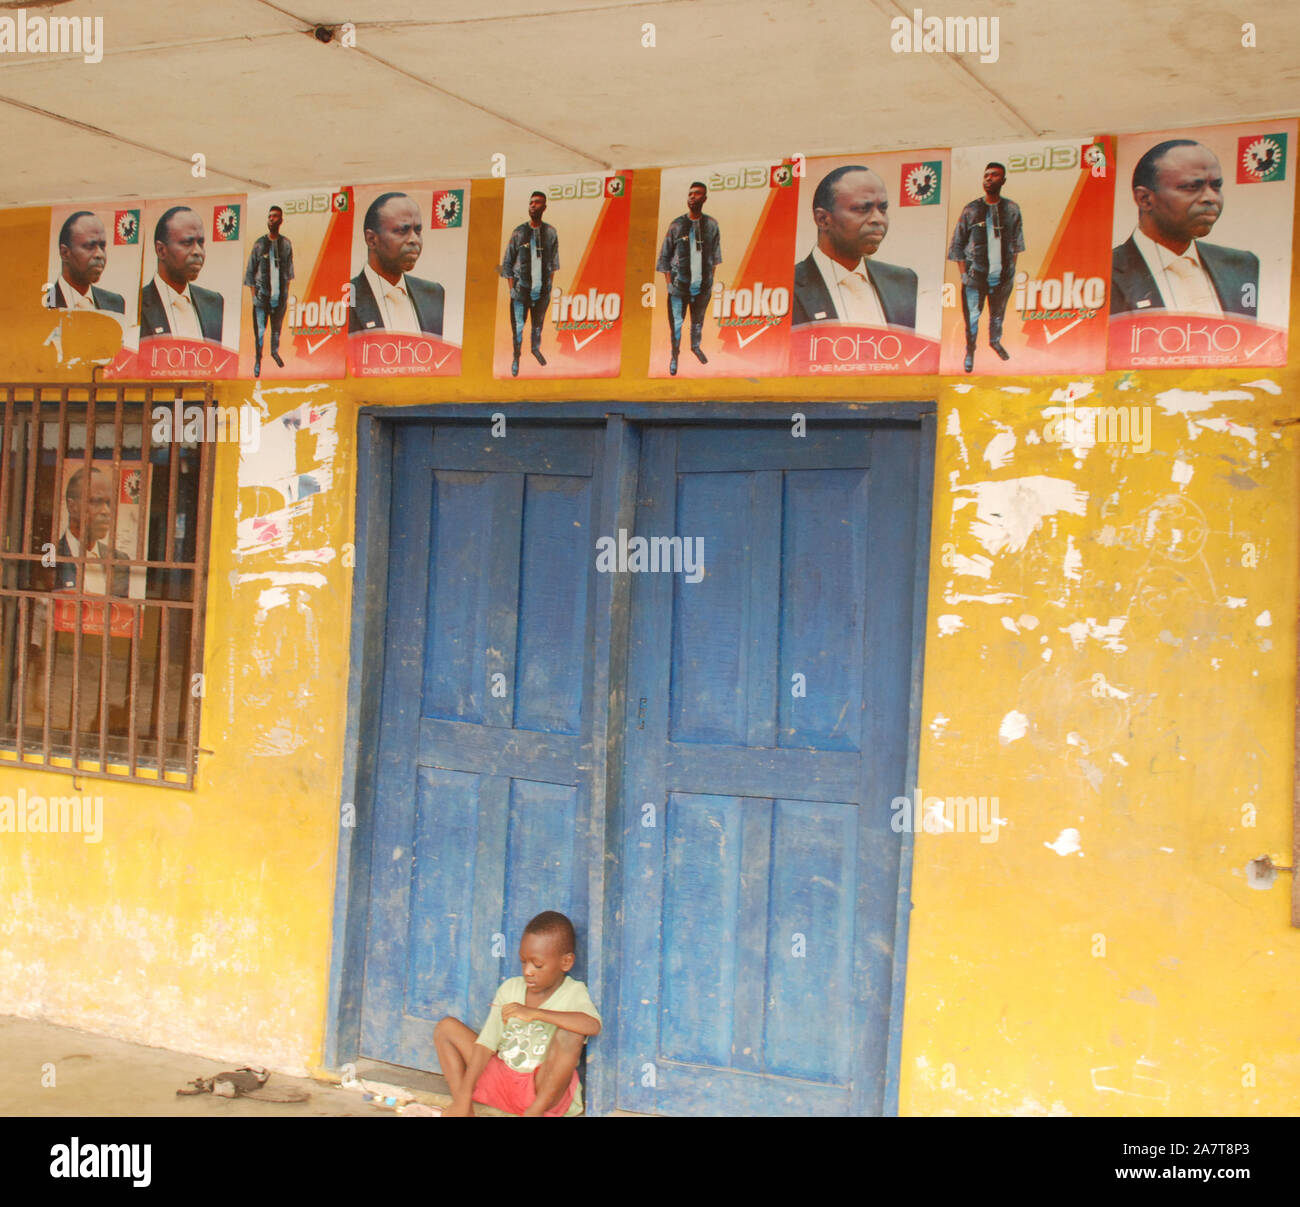 A boy sitting under the Governor's Poster at Ayetoro poor community of Ondo State, Nigeria. Stock Photo